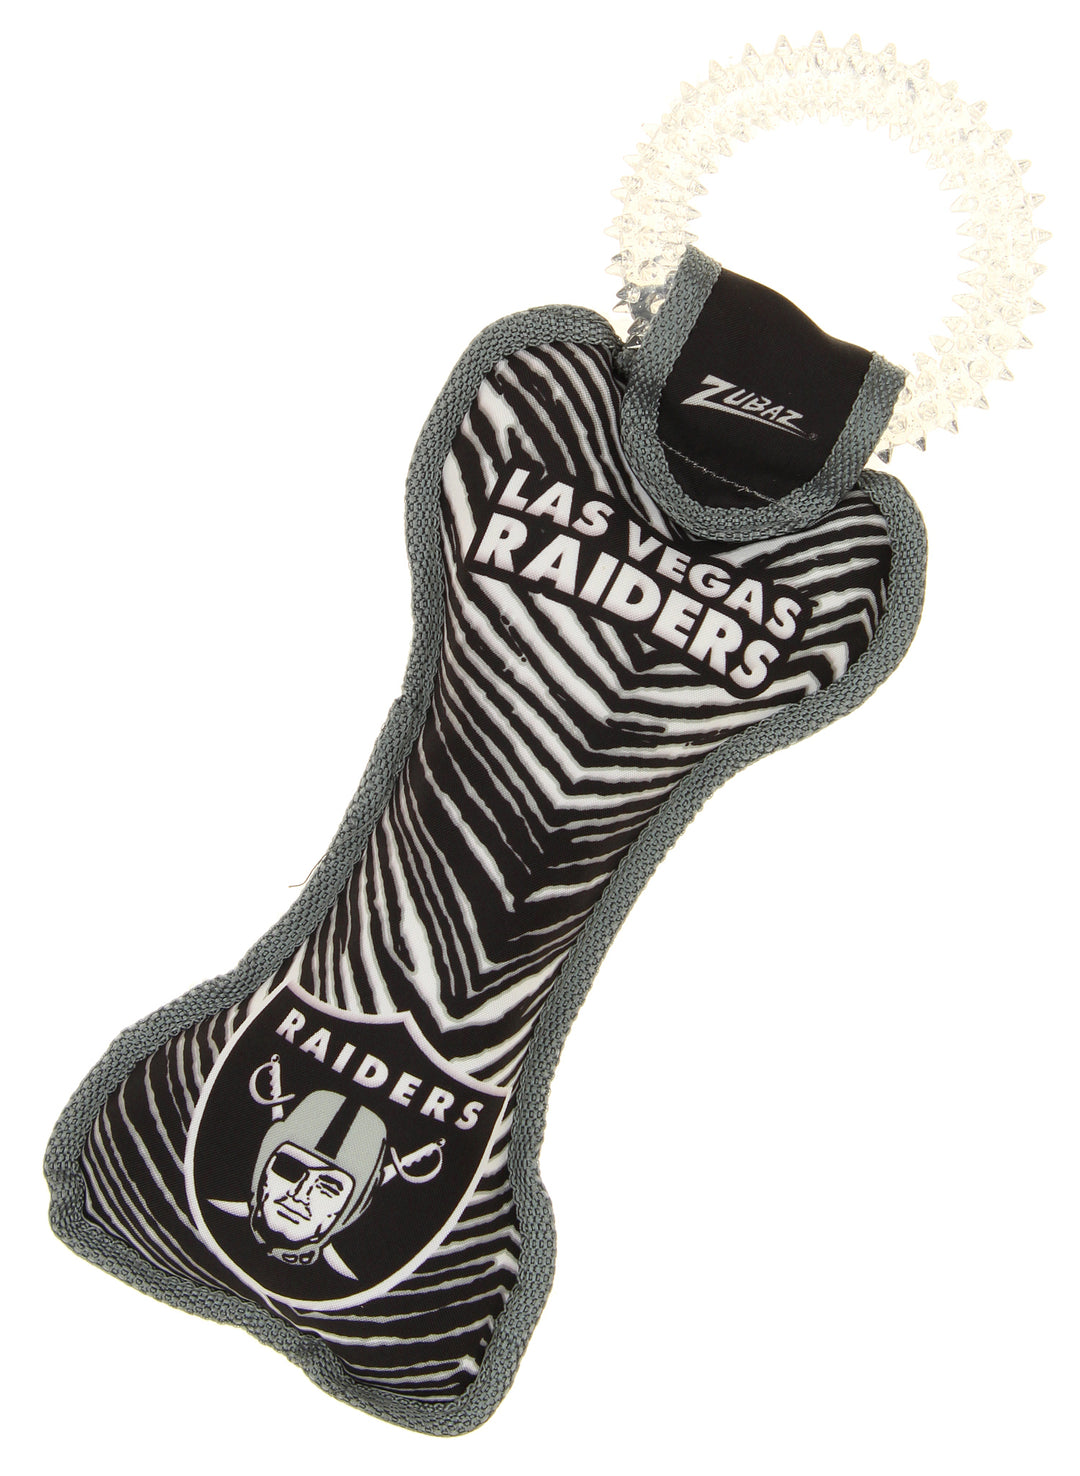 Zubaz X Pets First NFL Las Vegas Raiders Team Ring Tug Toy for Dogs